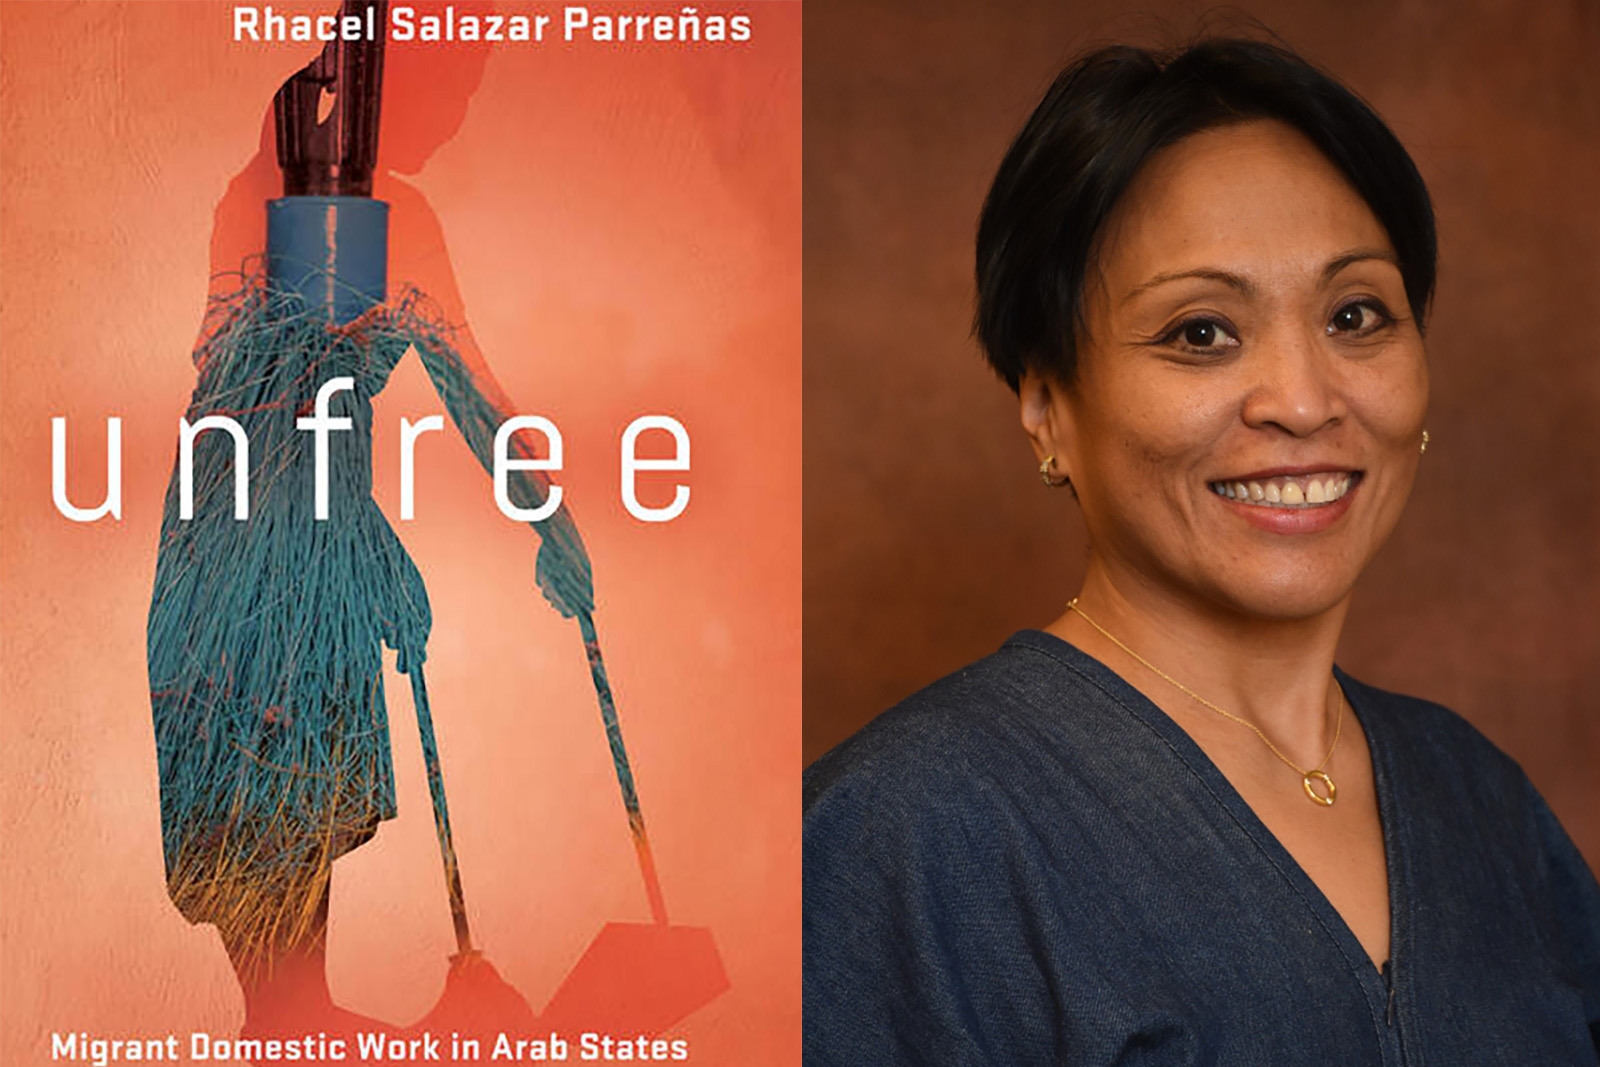 Unfree book cover that has an image of a women sweeping, beside a photo of Rhacel Salazar Parreñas.